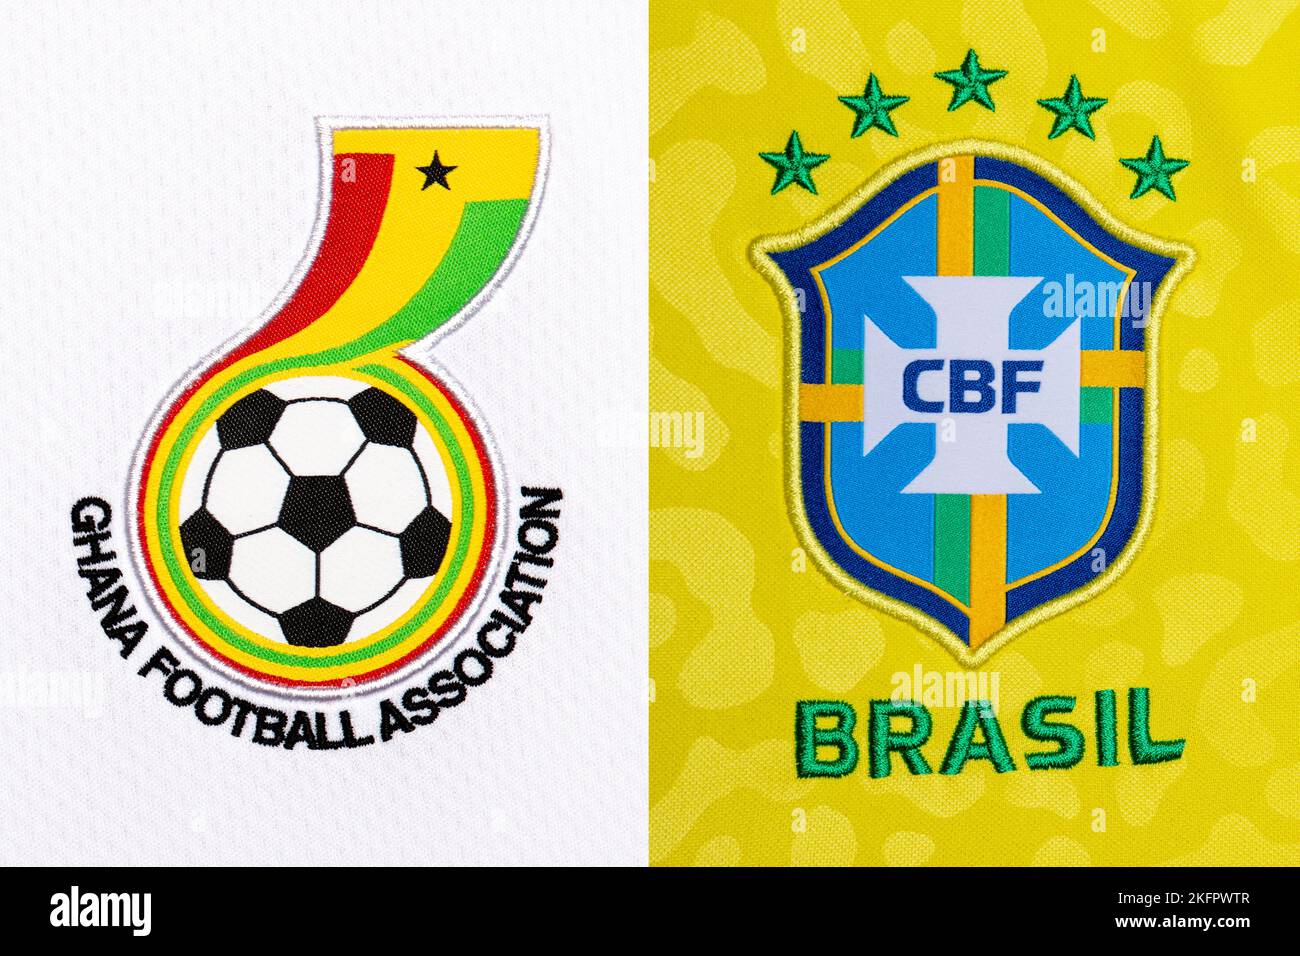 Low Poly - Wall hanging - Others [2022 FIFA World Cup Qatar] Brazil Logo